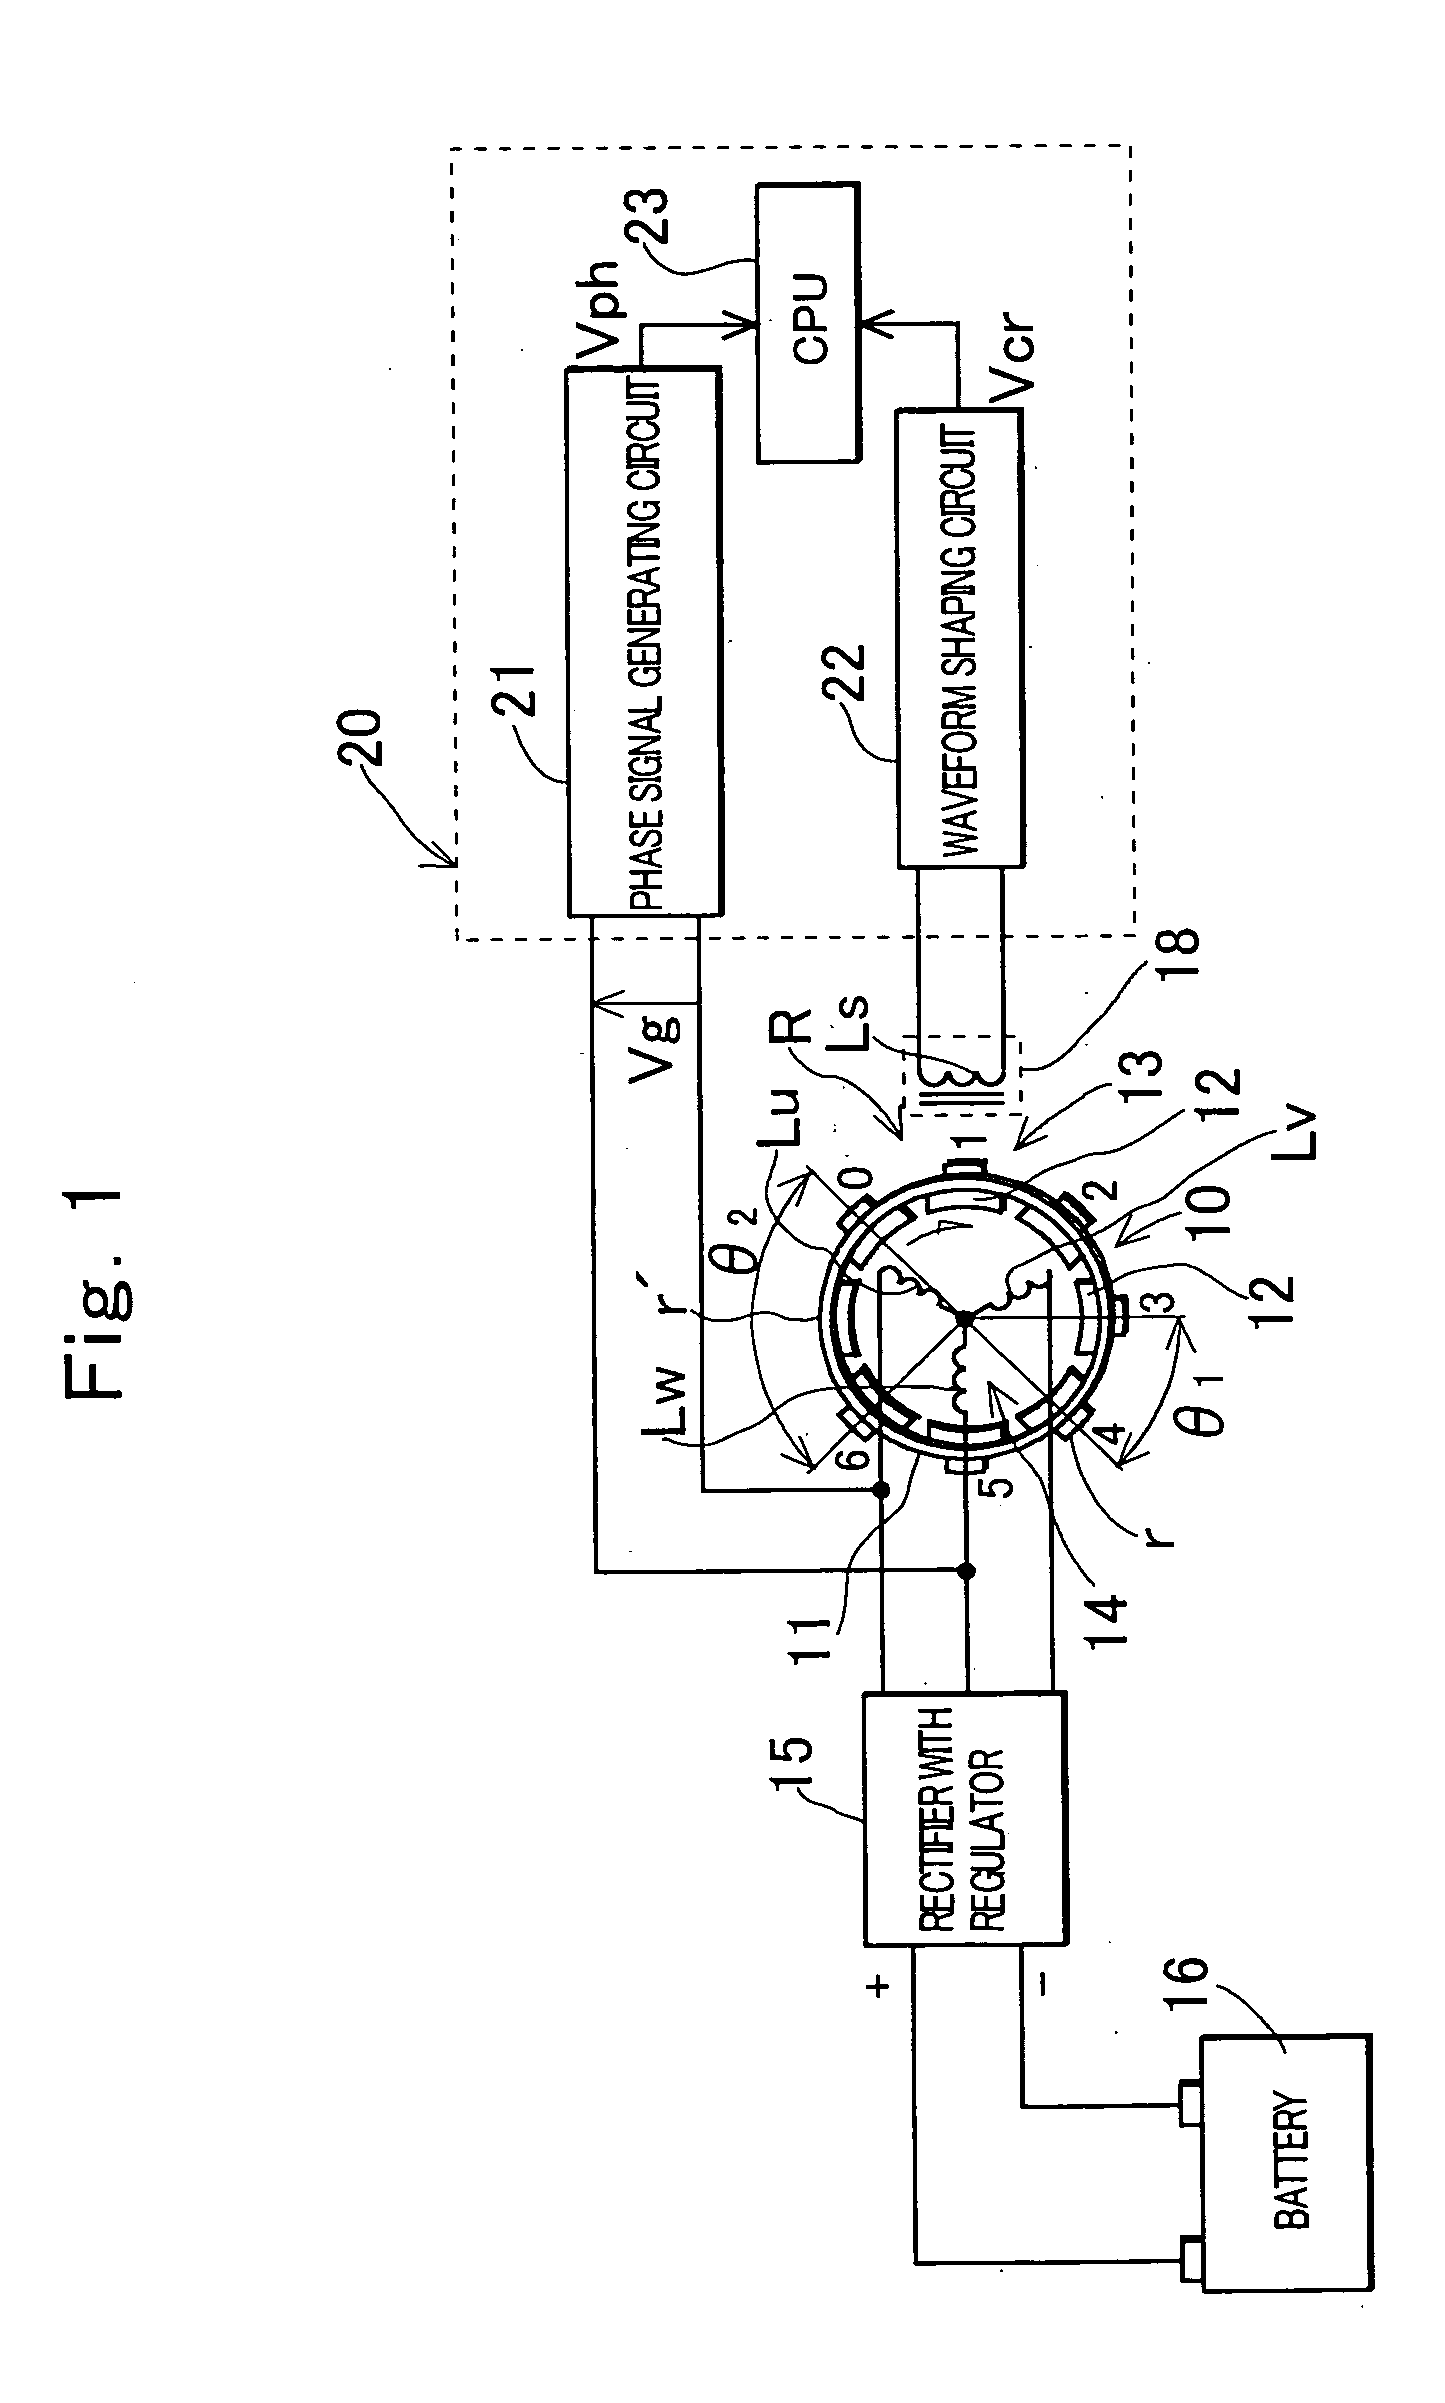 Engine rotation information detection device